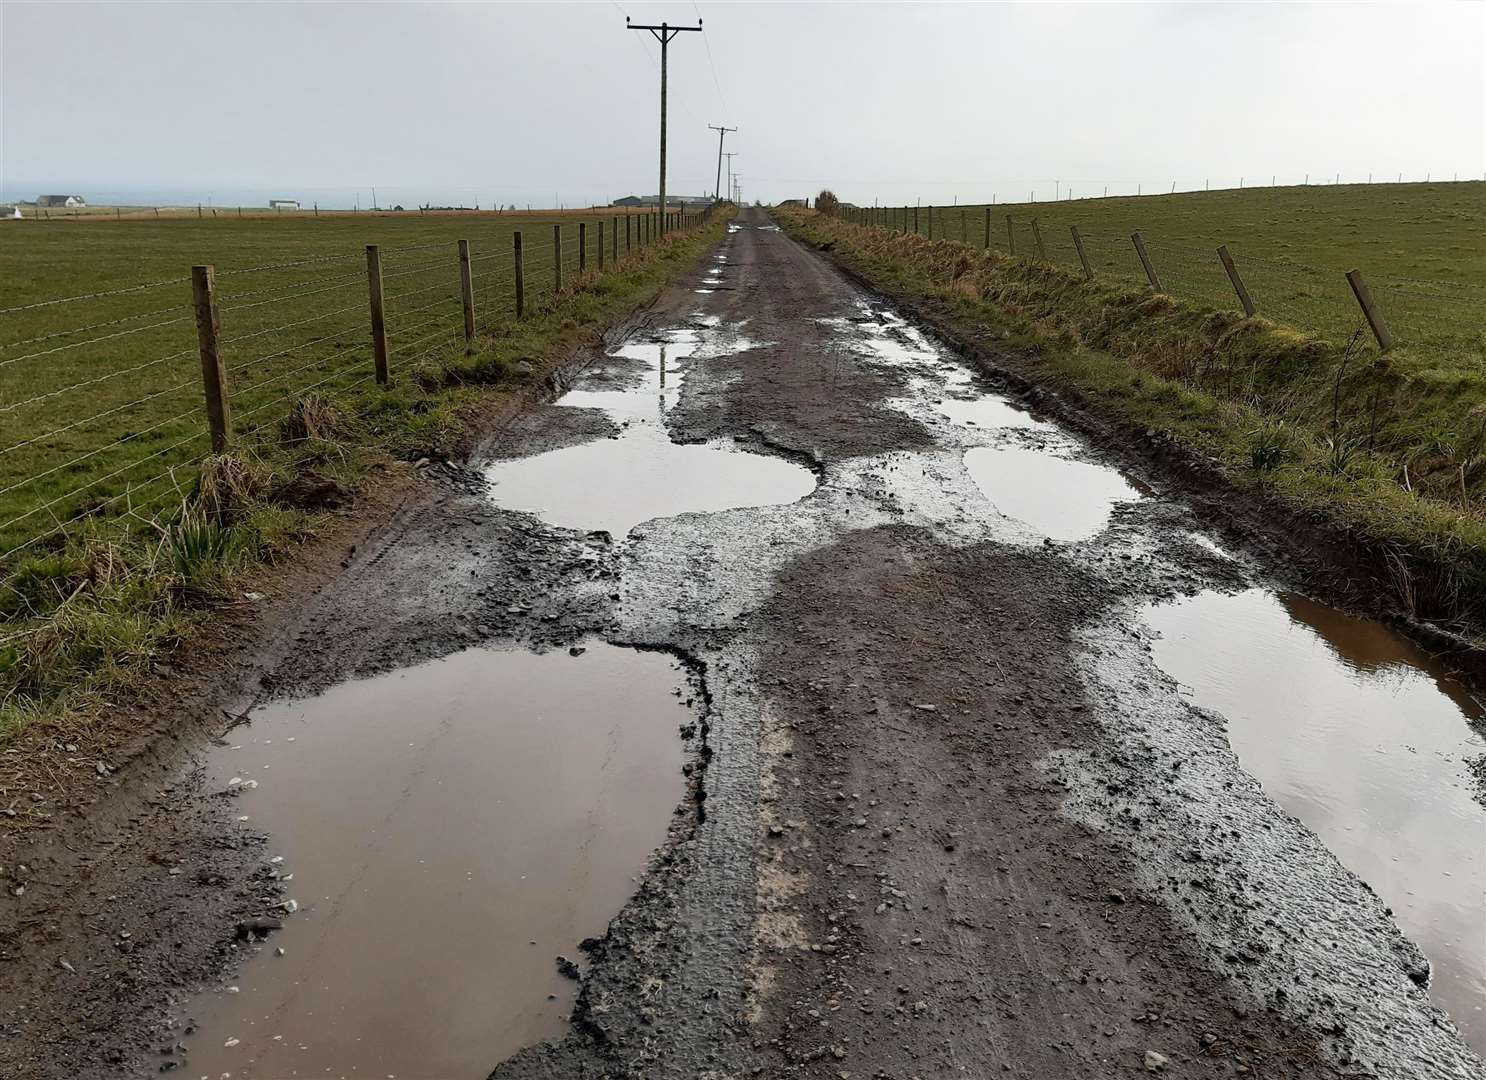 The road leading to a camping pod business at Auckengill is described as ‘disgraceful’.